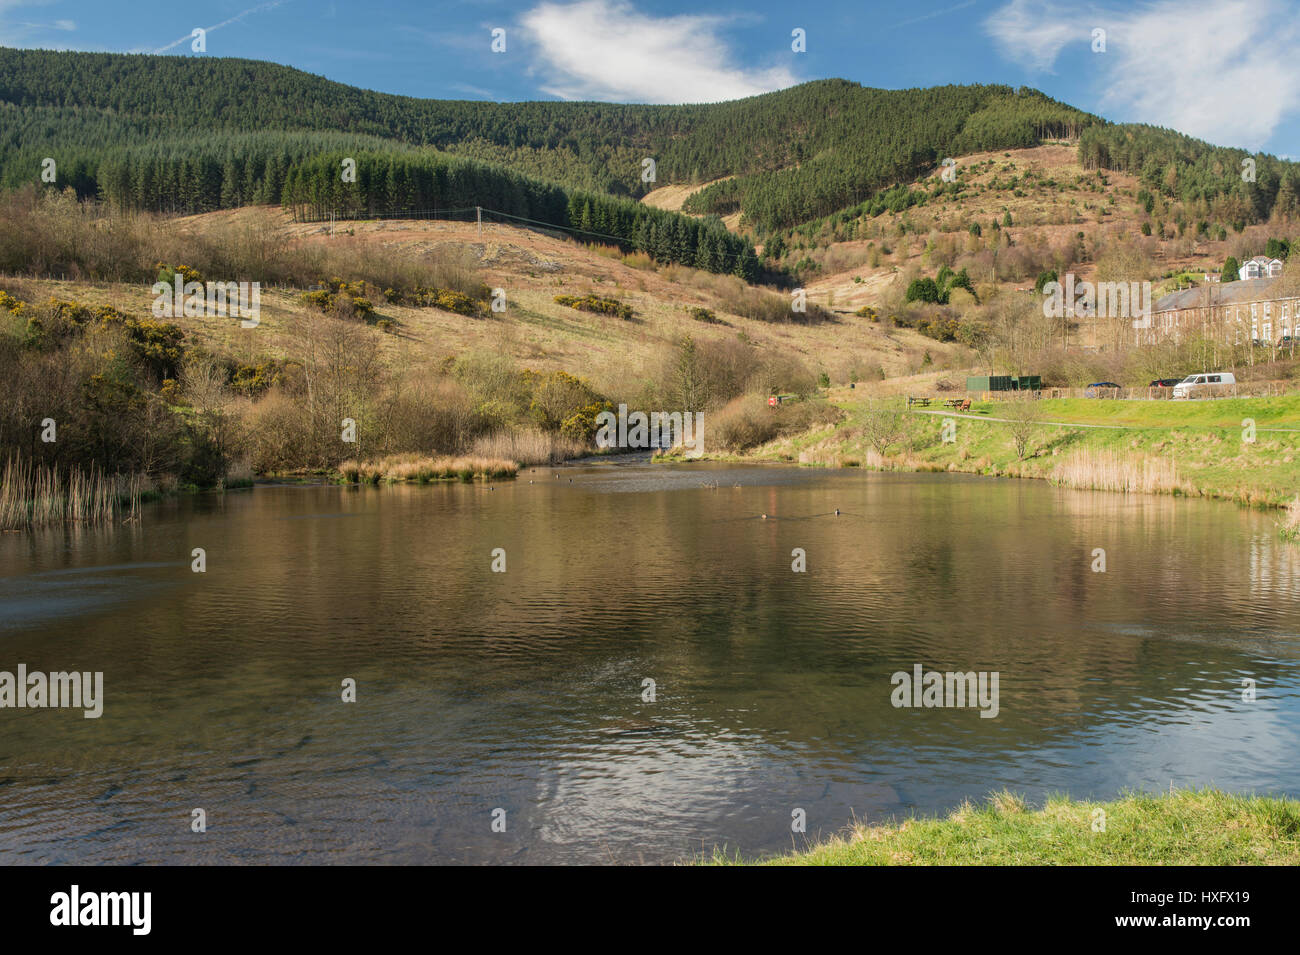 The head of the Garw Valley, where land reclamation has improved the site of the old colliery at Blaengarw, south Wales. Stock Photo